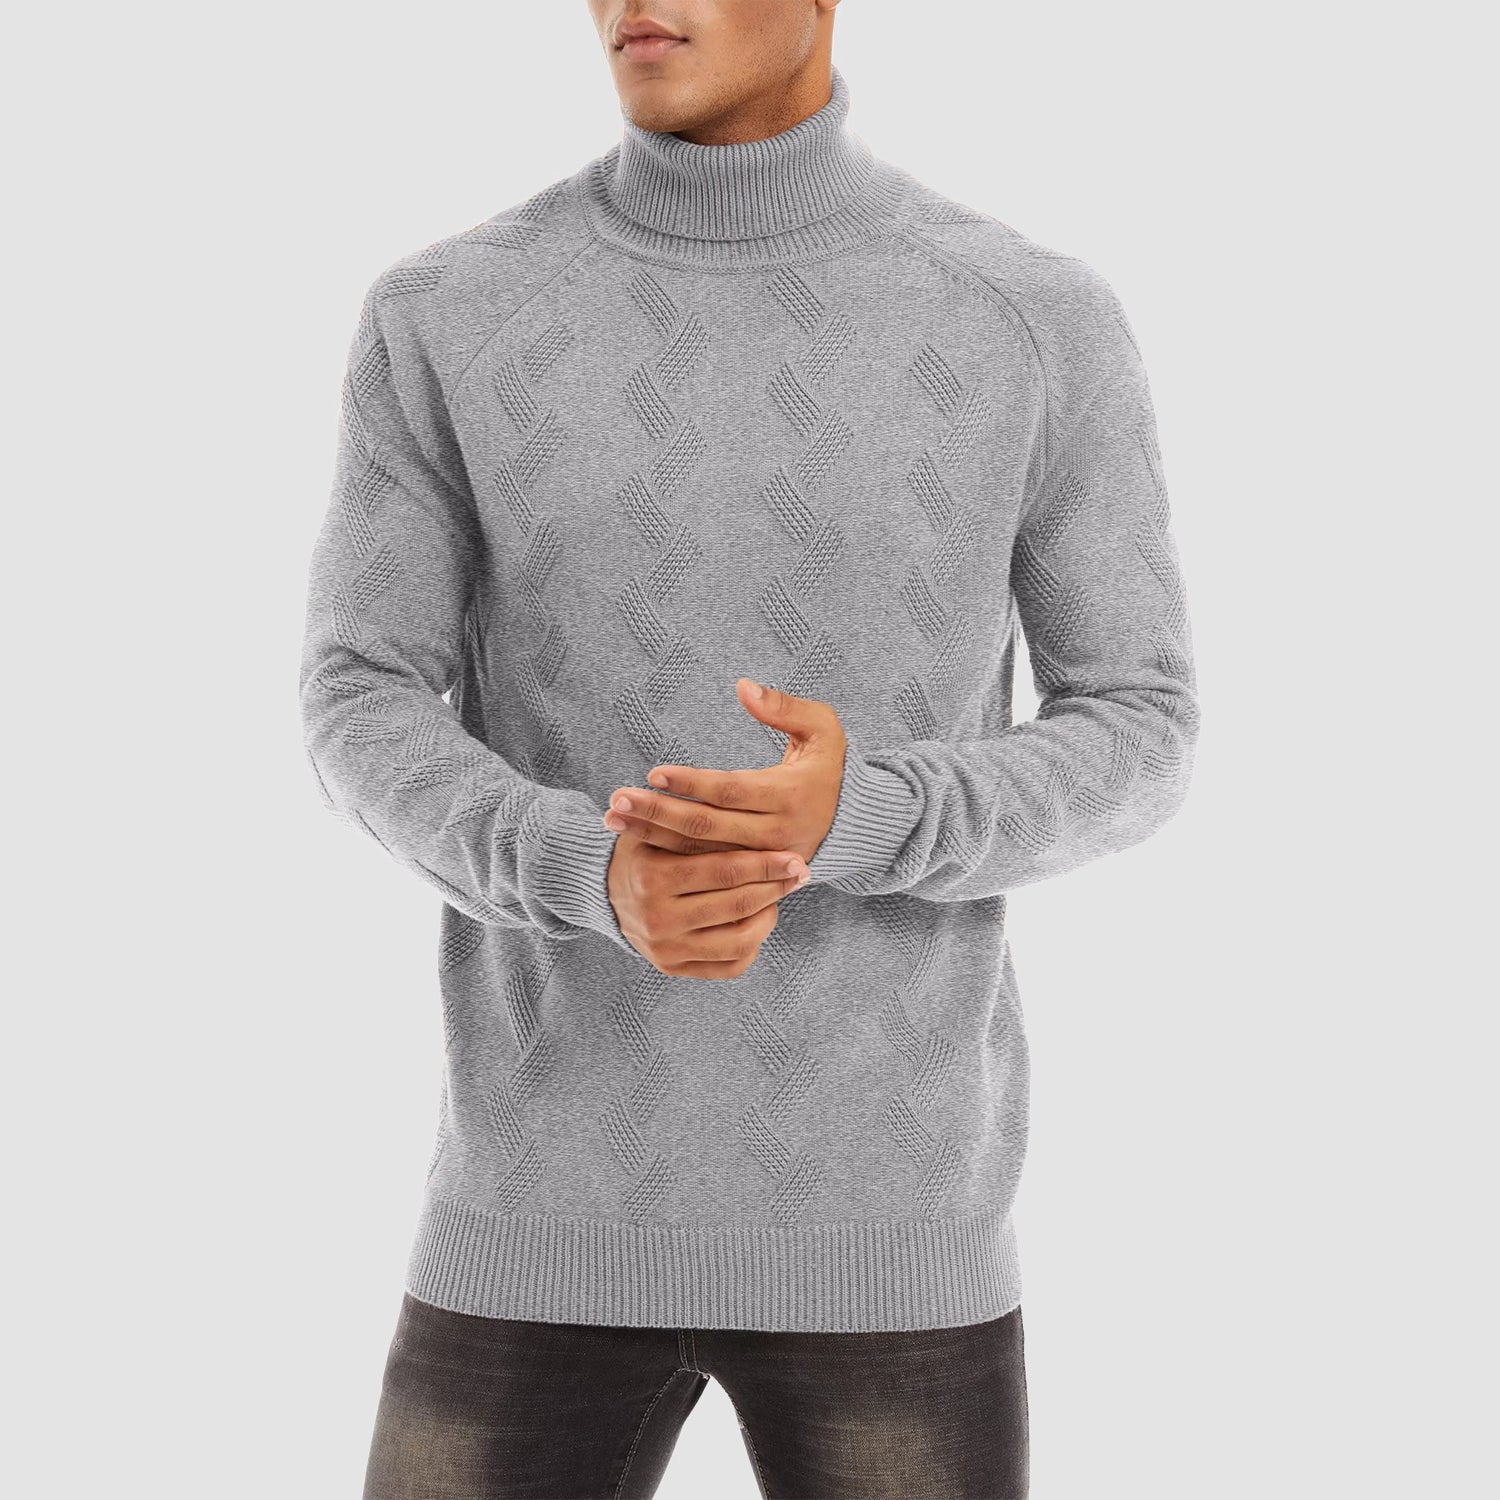 Men's Turtleneck Sweater Heavyweight Long Sleeves Cotton Pullover Knitted Casual Sweatshirt